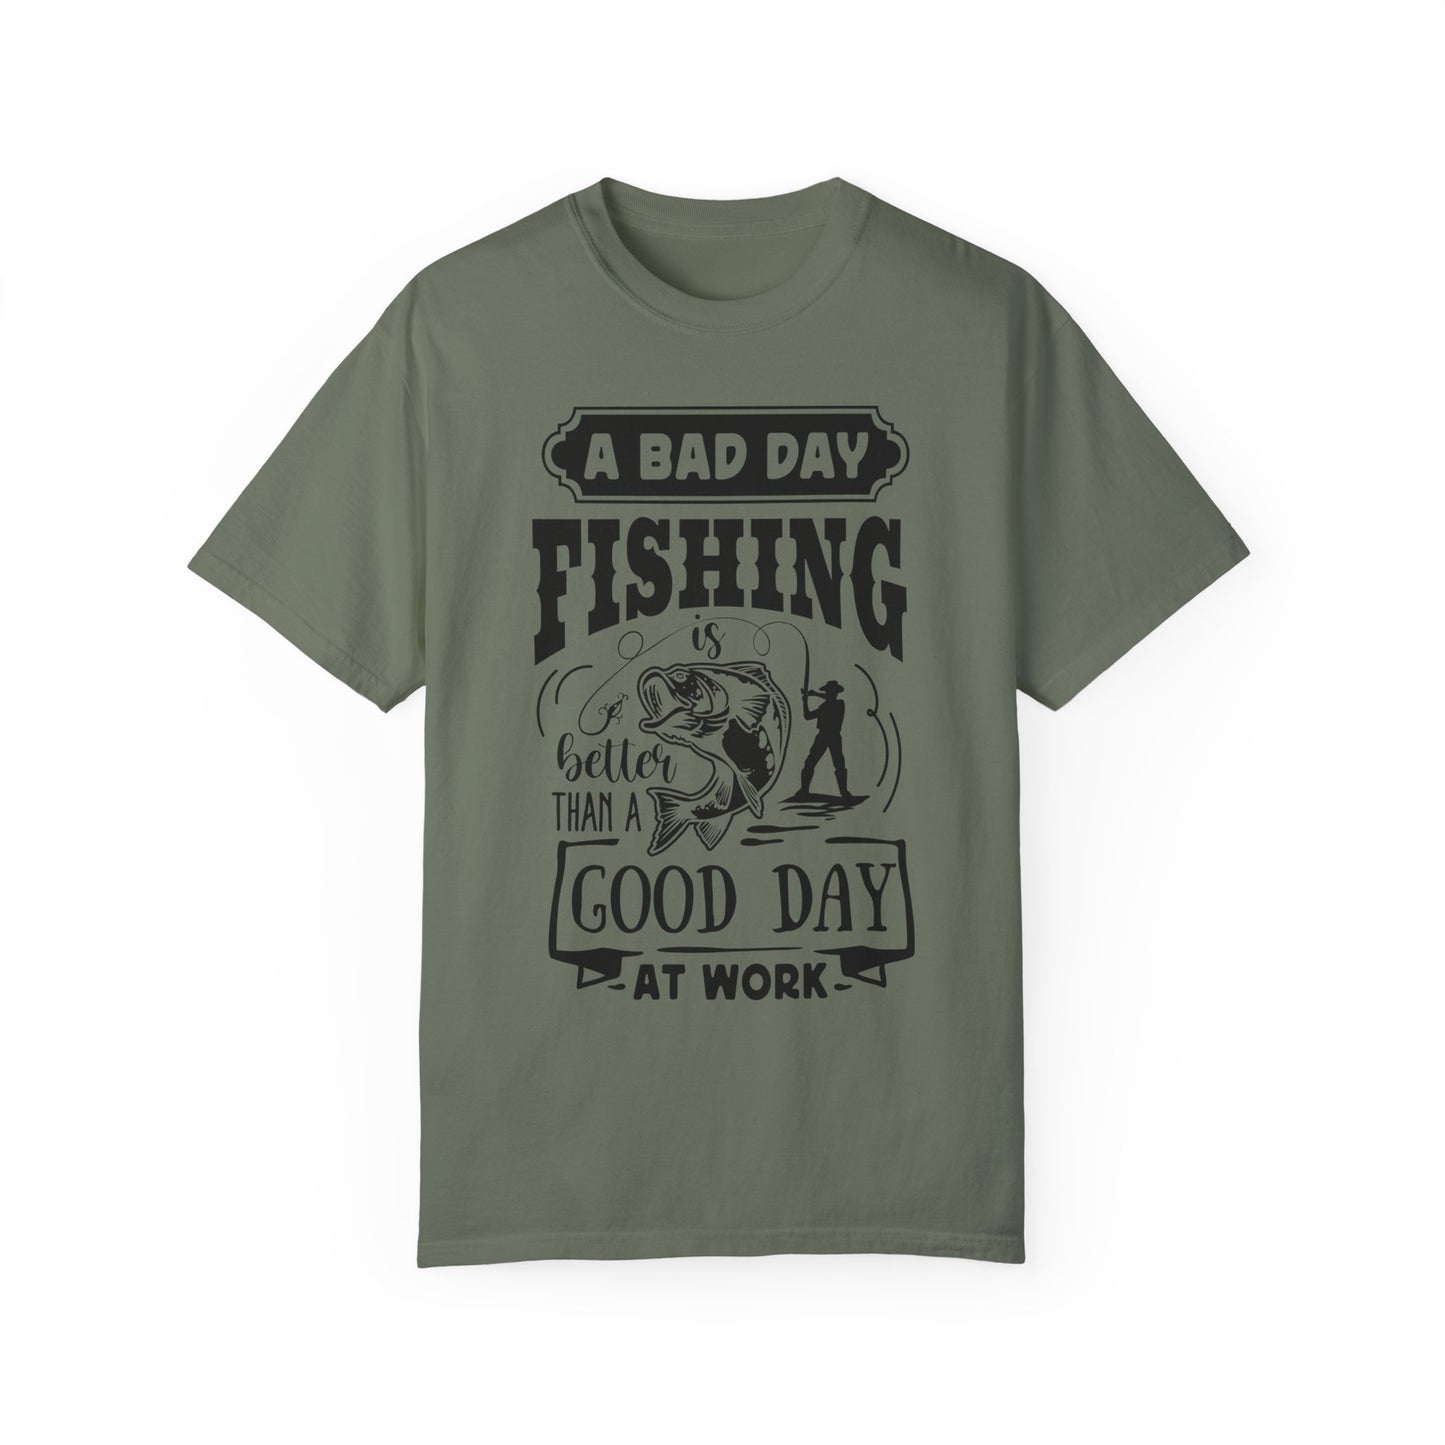 A bad day fishing: Unisex Garment-Dyed T-shirt